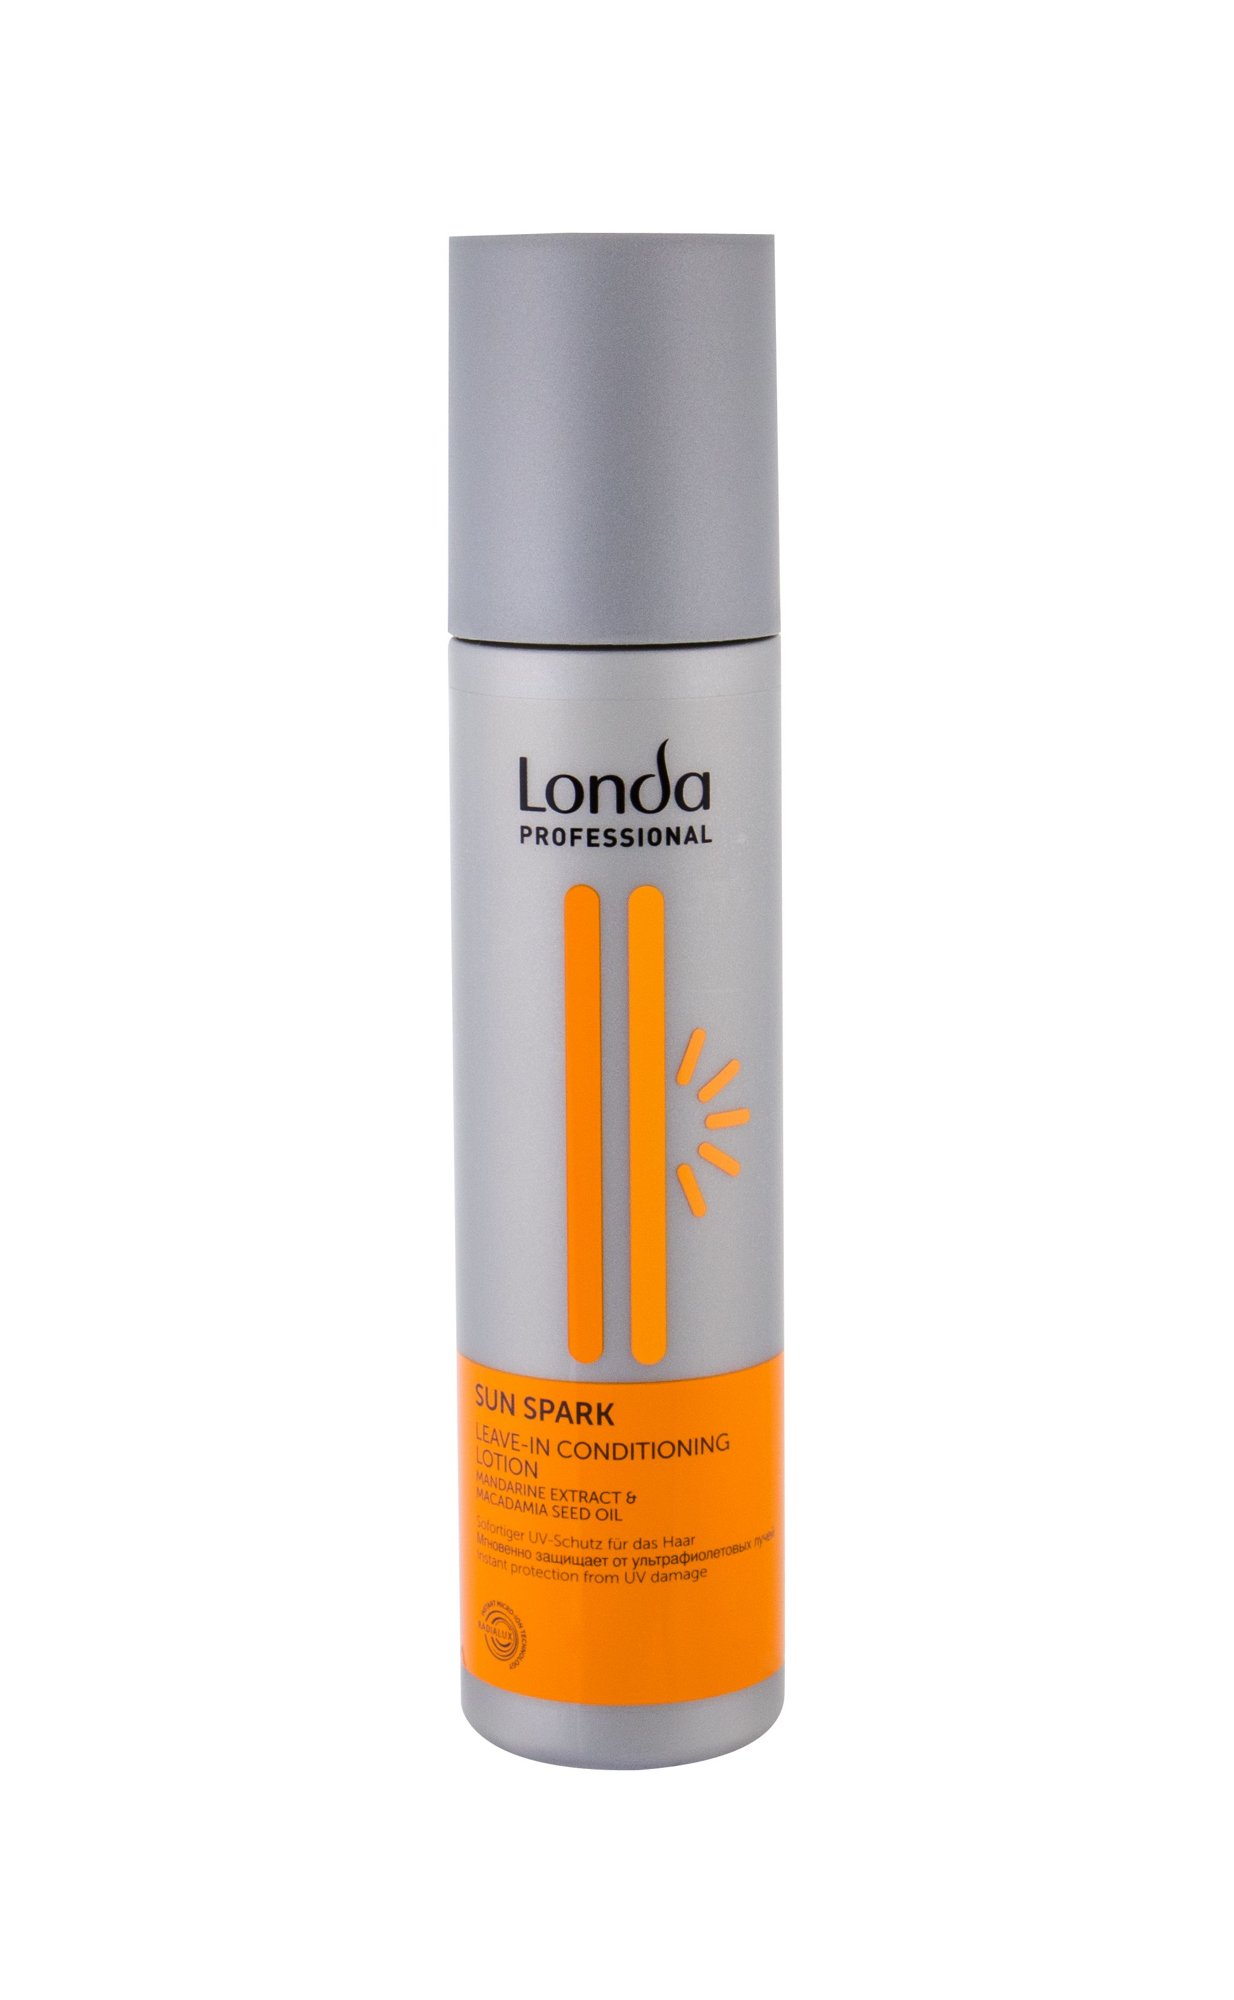 Londa Professional Sun Spark Leave-In Conditioning Lotion